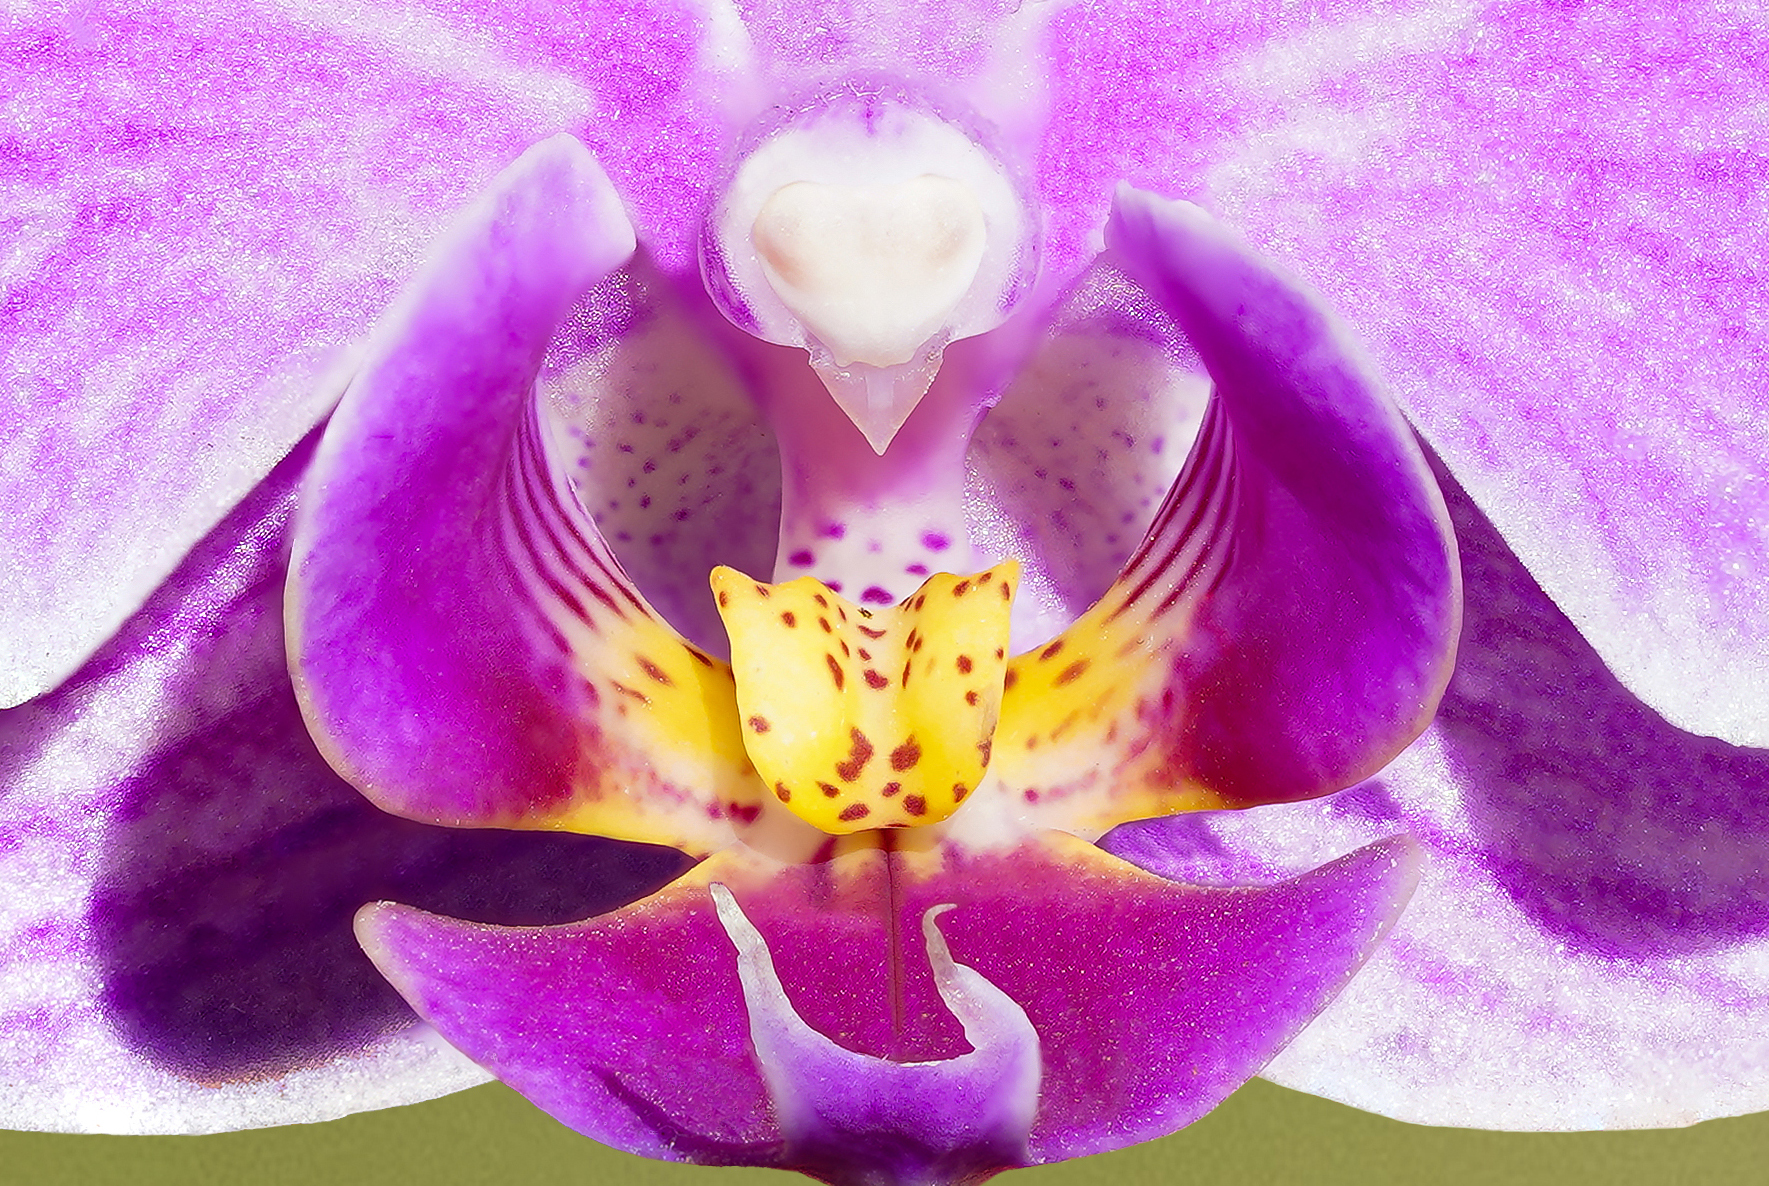 Orchid - Focus Stacking Enlargement of 46 Images ...